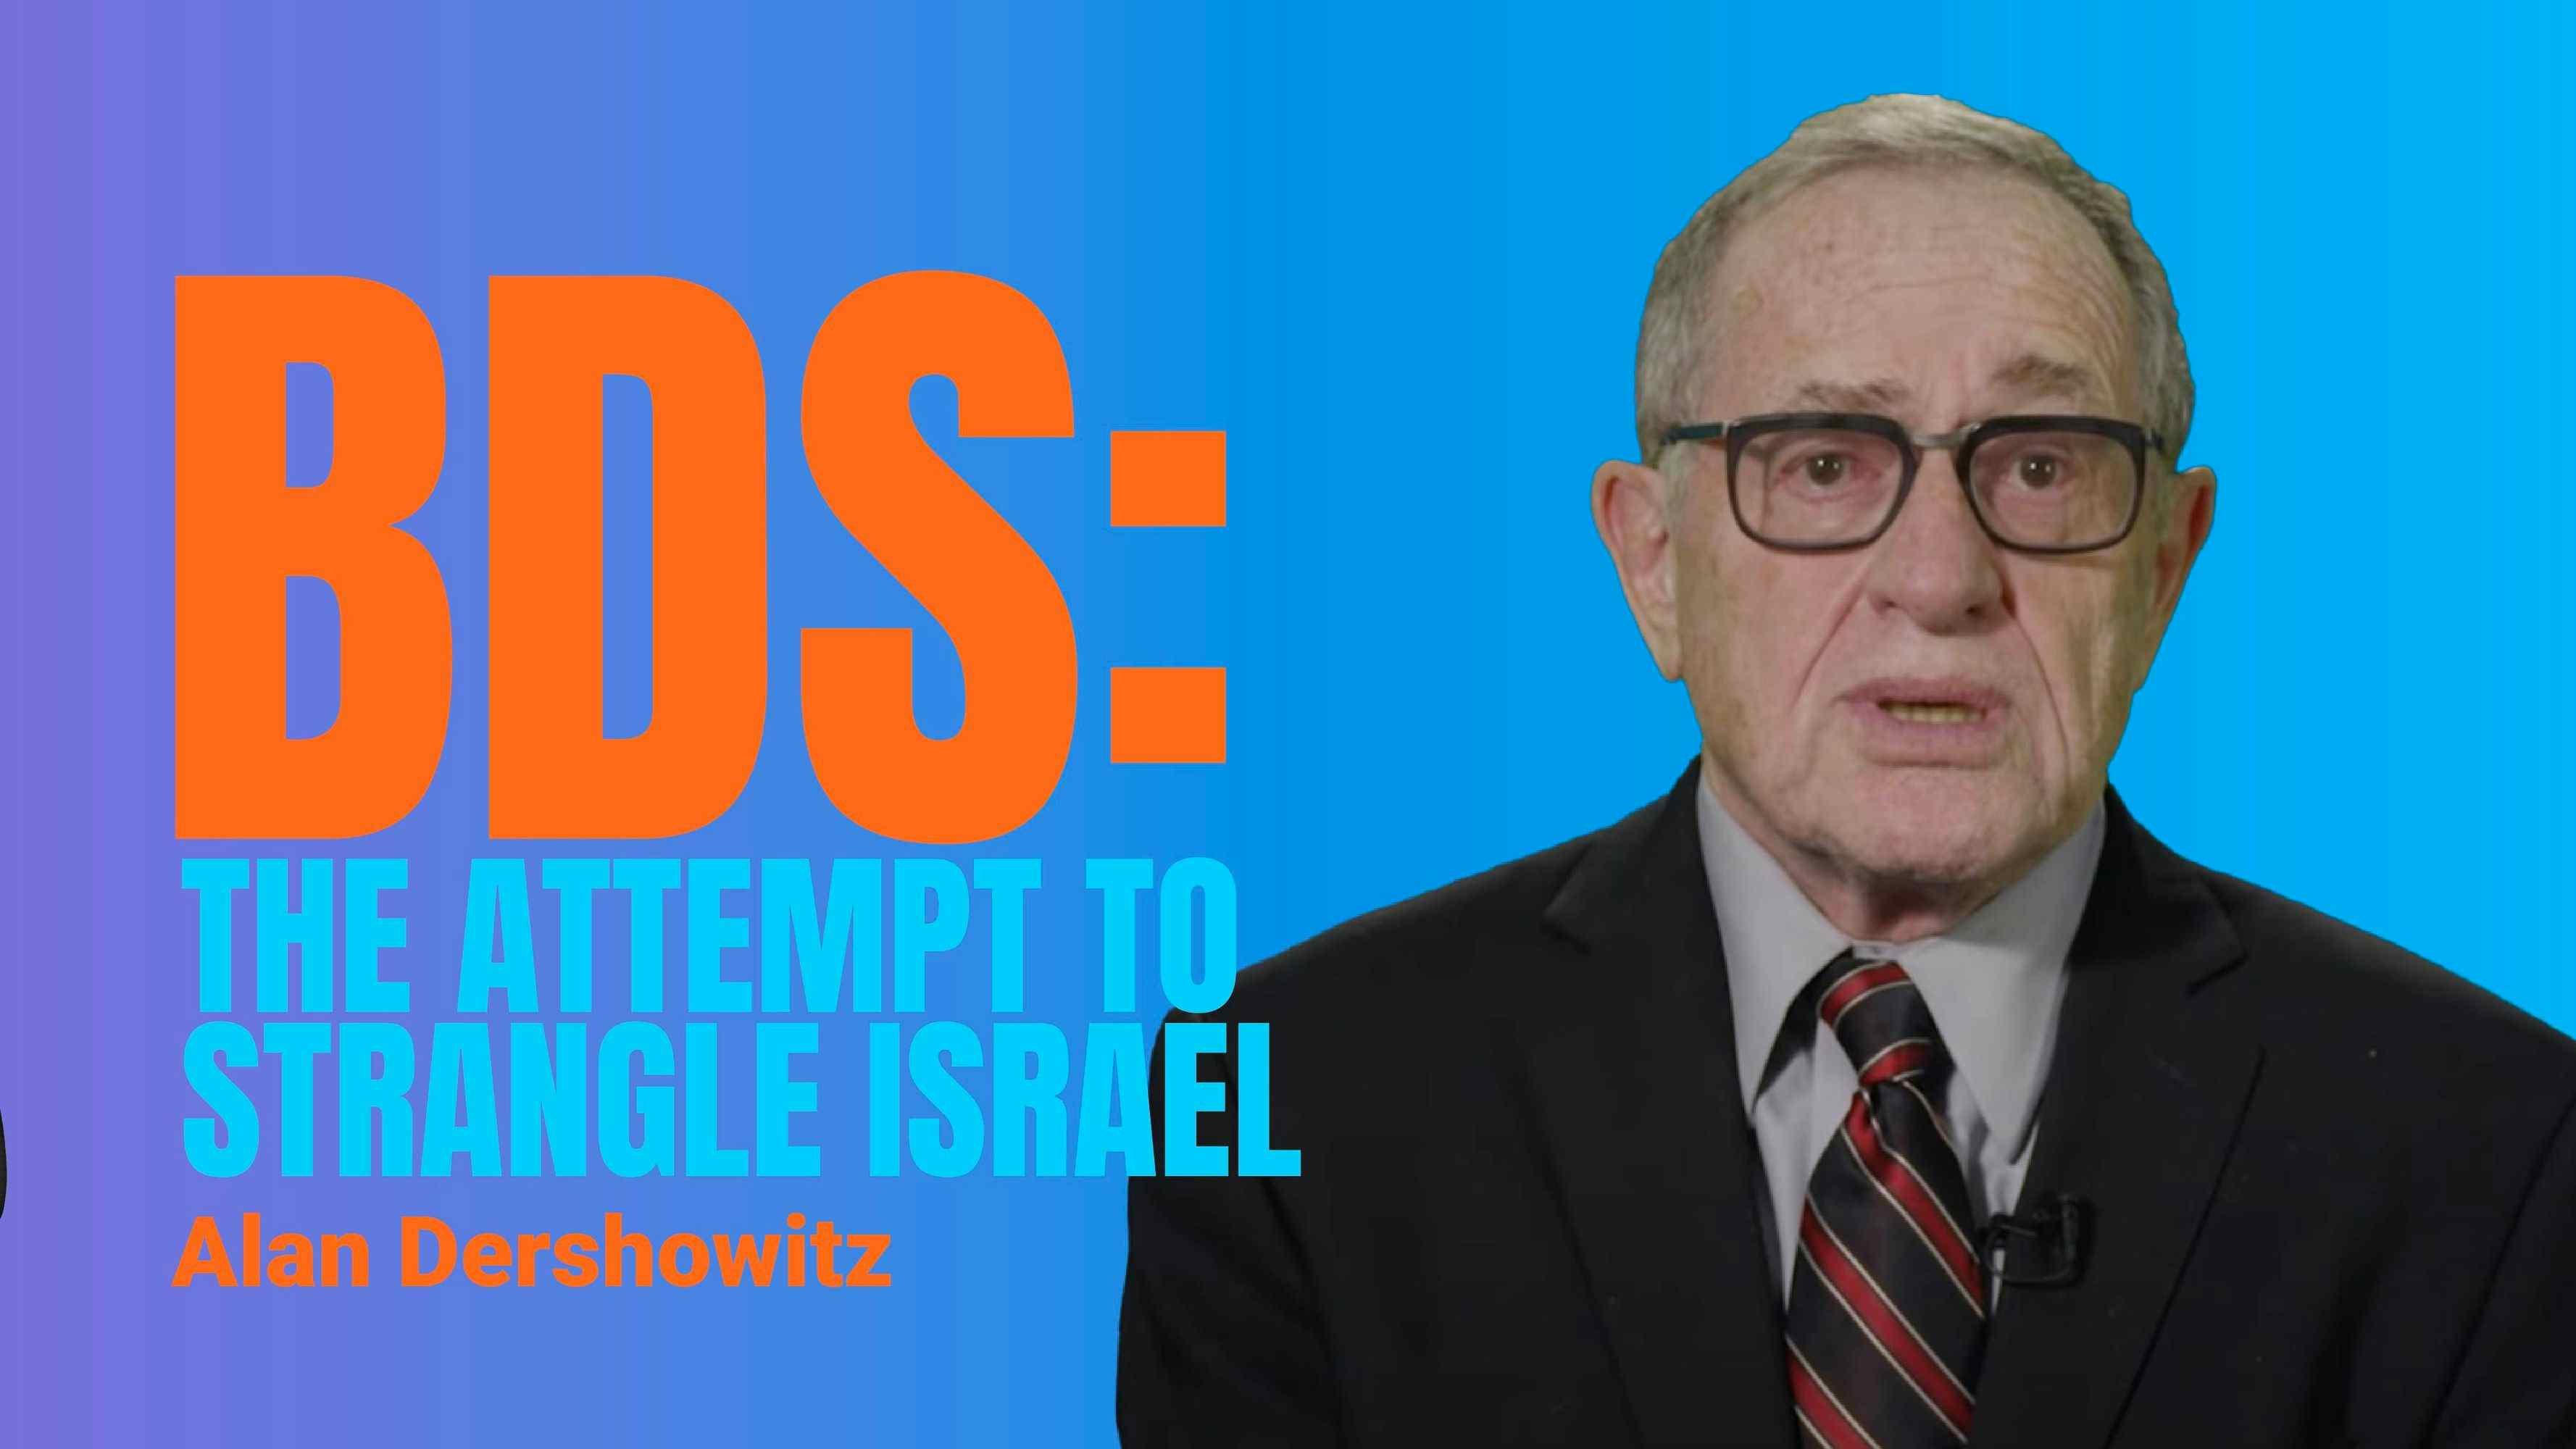 BDS: The Attempt to Strangle Israel